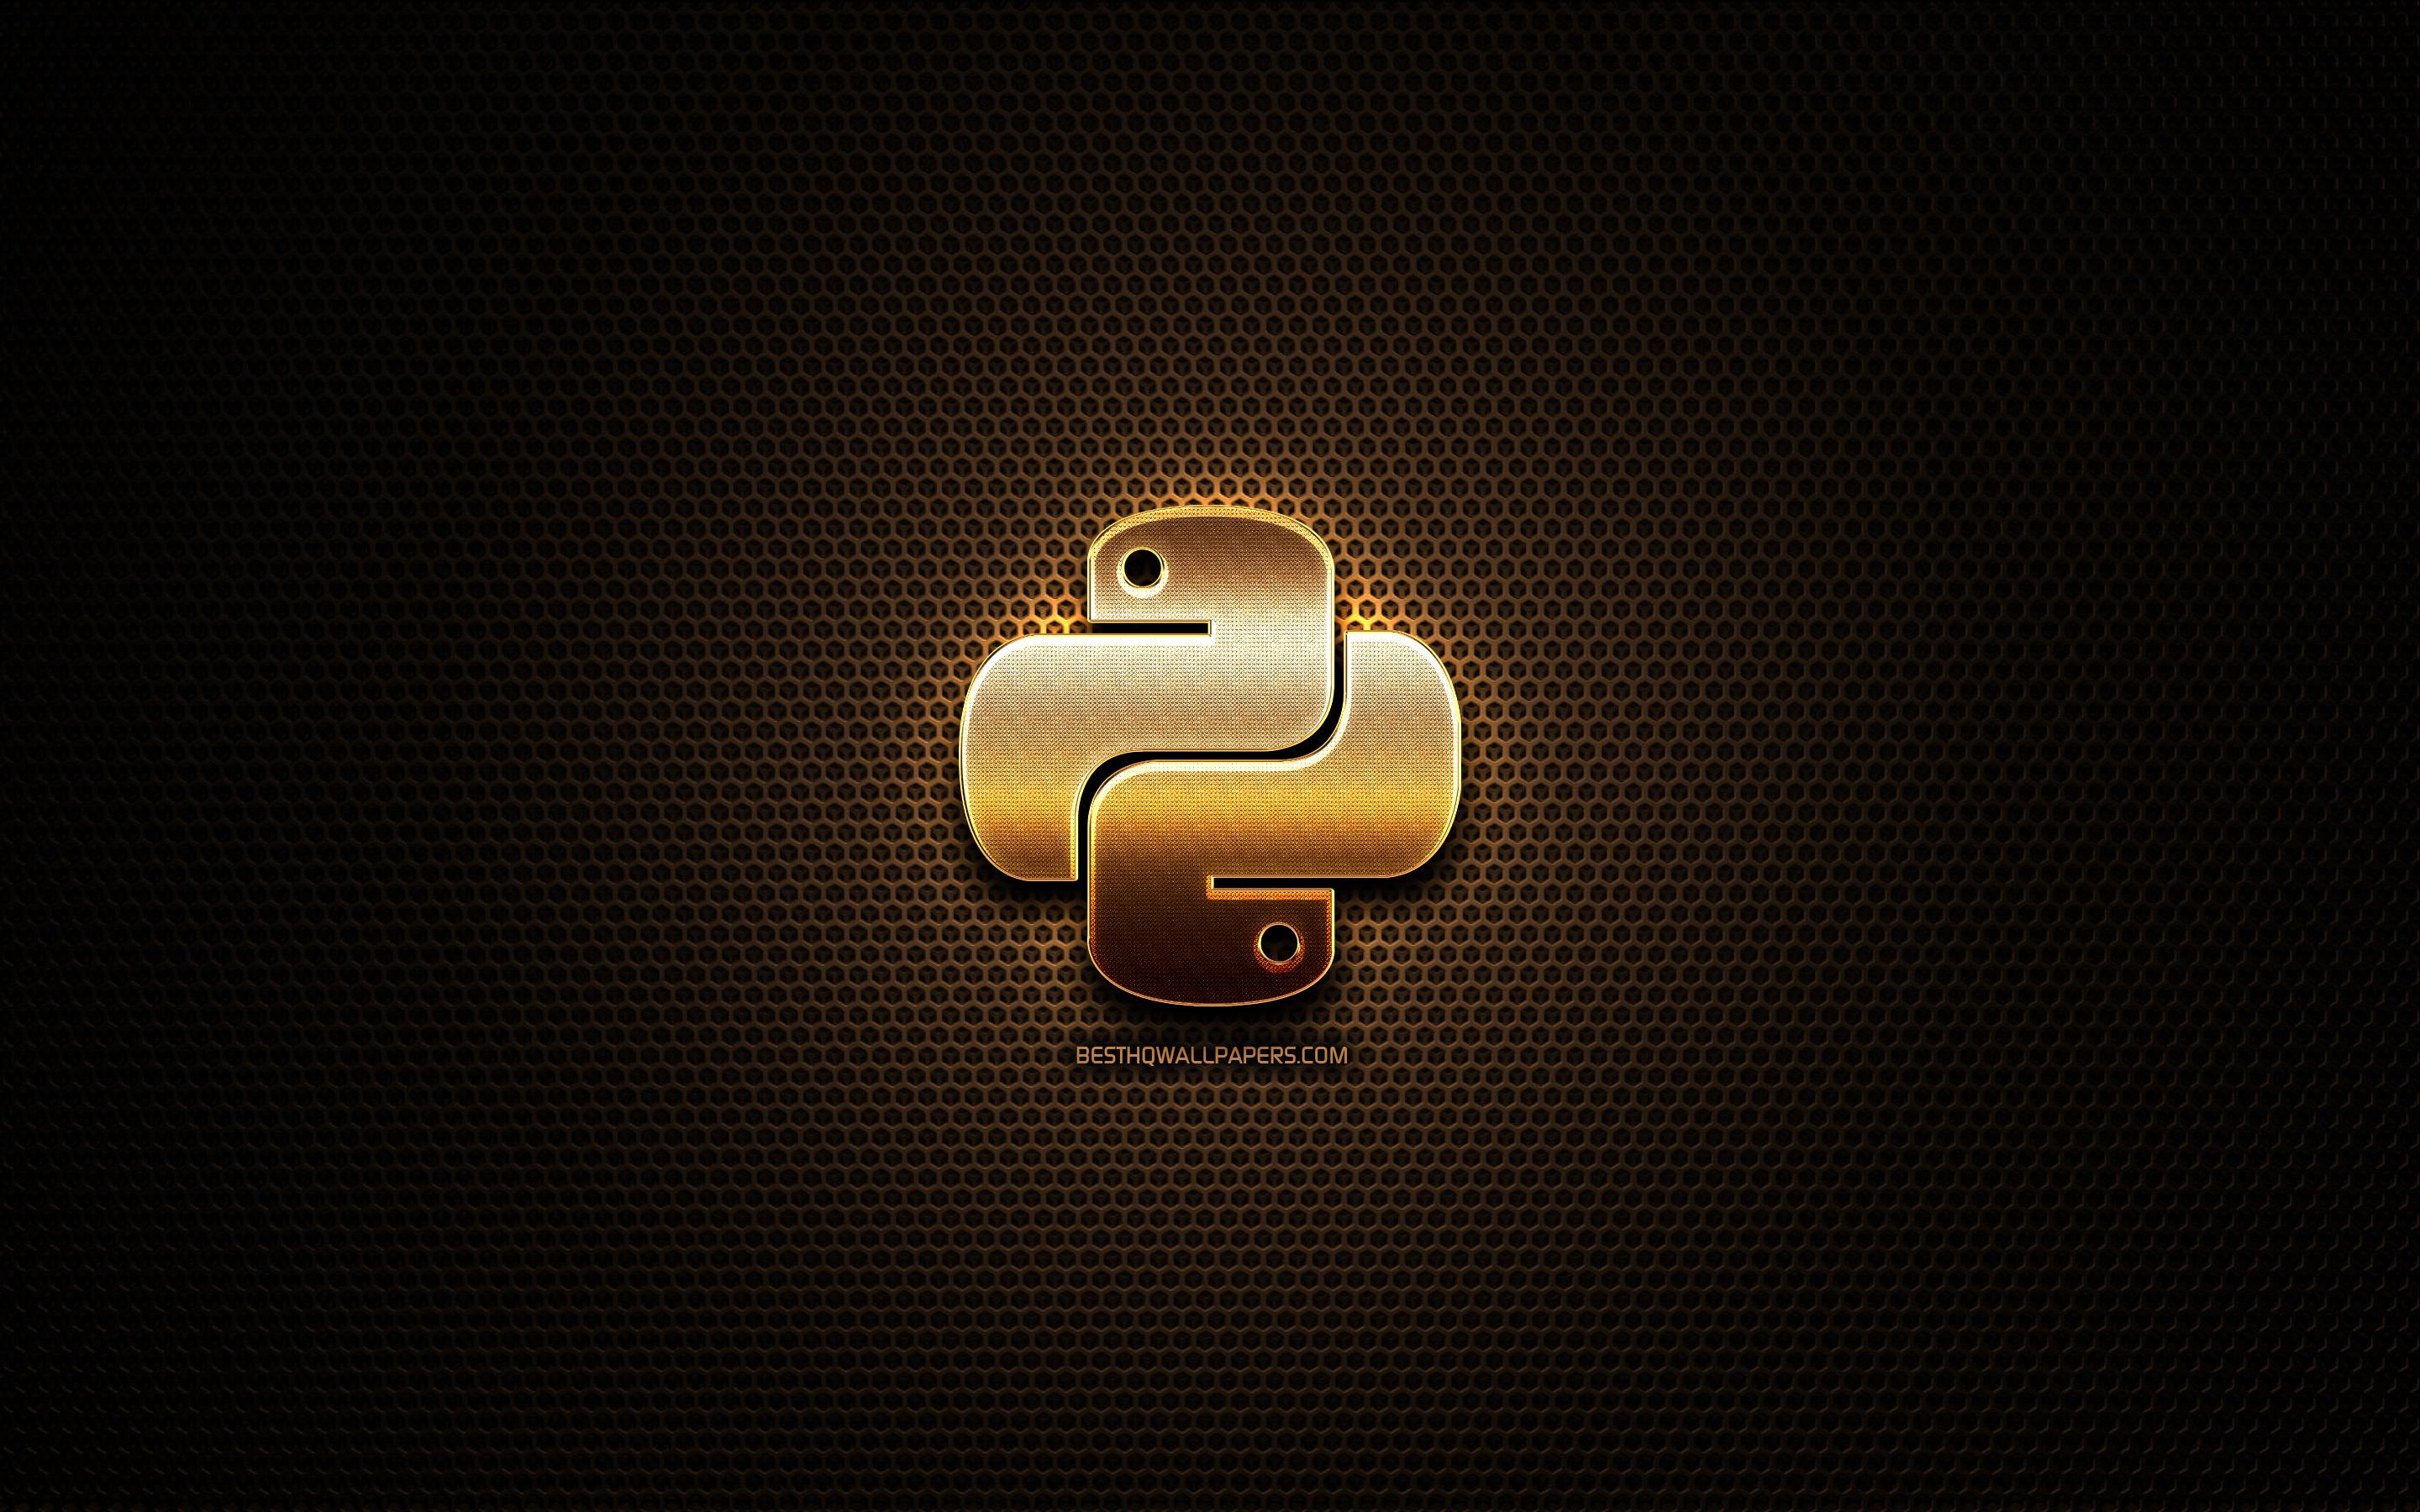 Download wallpaper Python glitter logo, programming language, grid metal background, Python, creative, programming language signs, Python logo for desktop with resolution 2880x1800. High Quality HD picture wallpaper